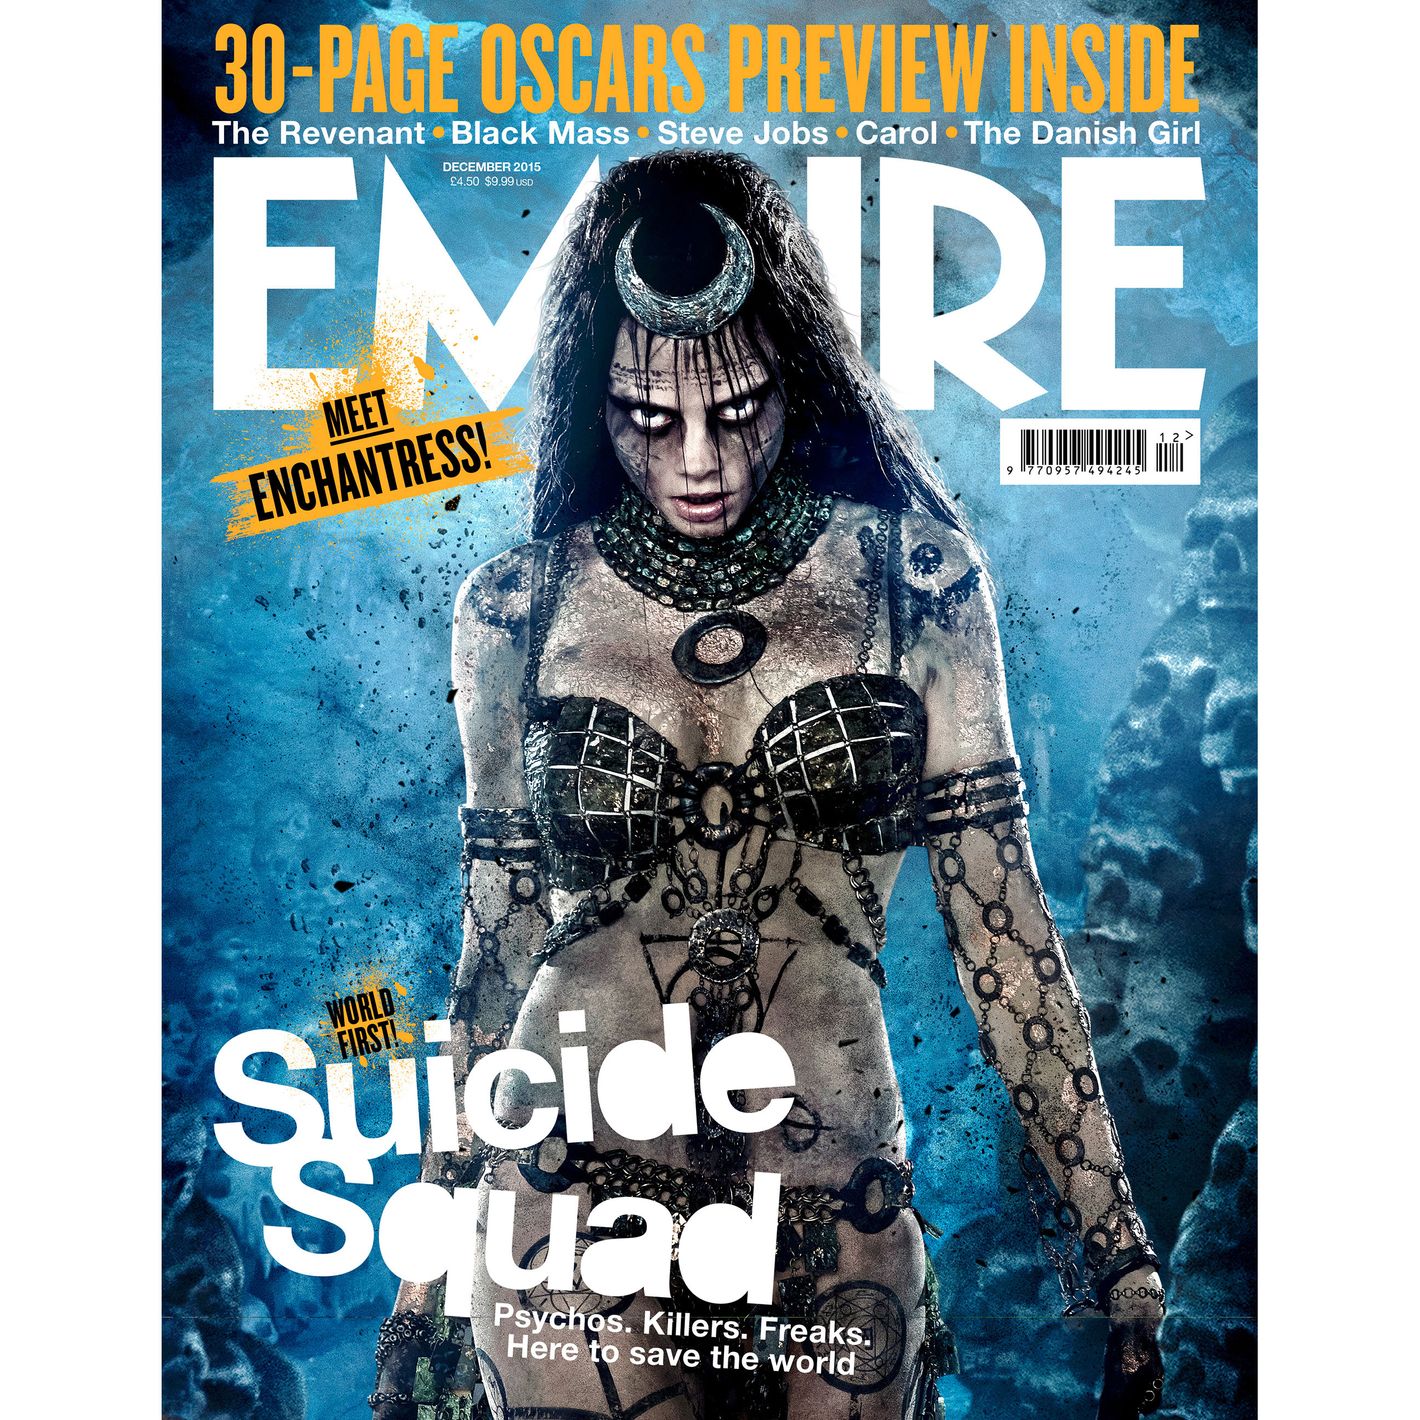 Suicide Squad Magazine Looks Yep Deadshot And Harley Quinn Have Their Own Badass Covers Too